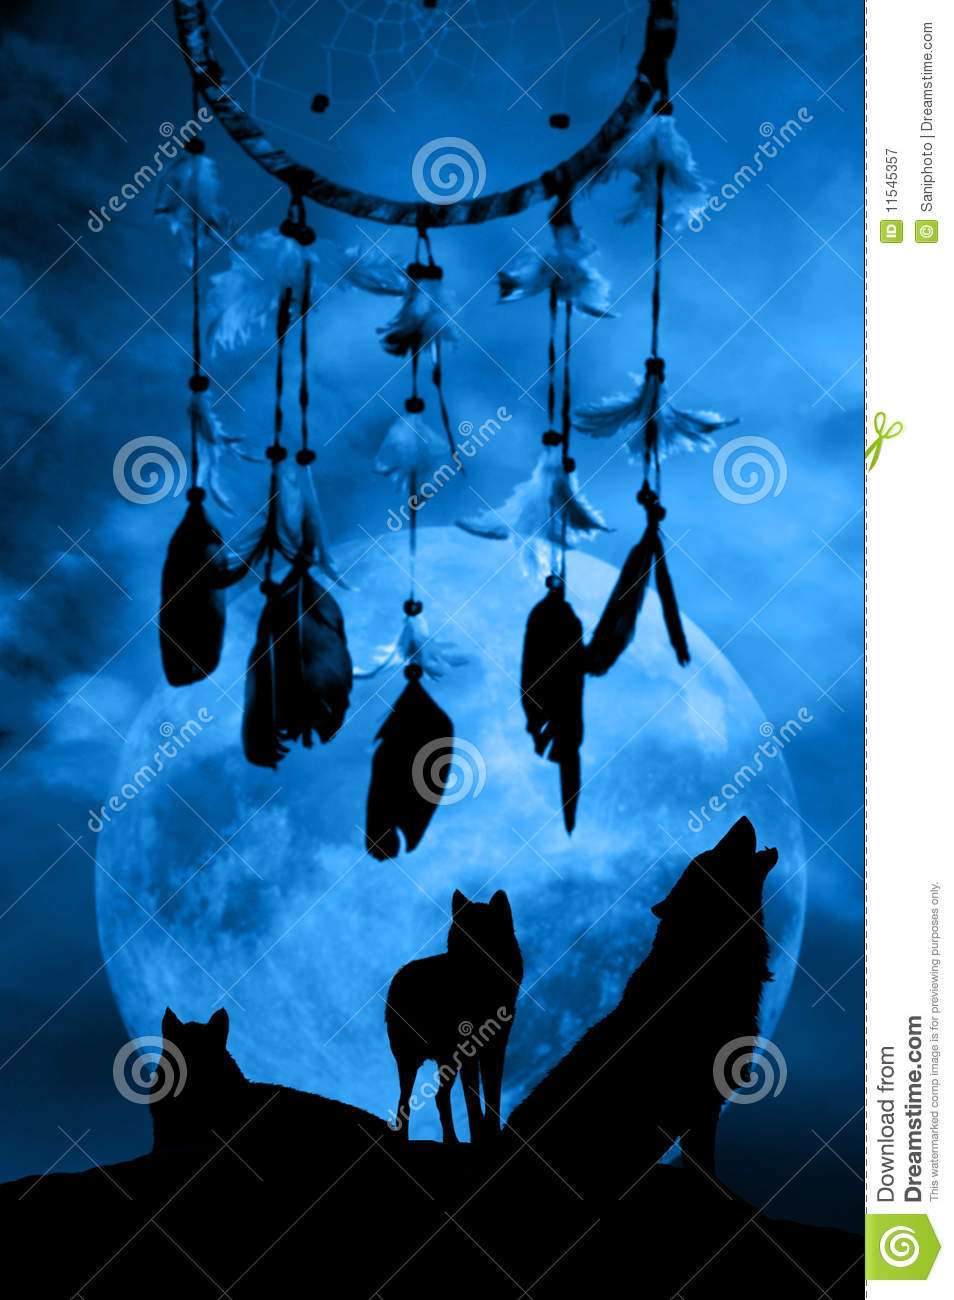 Pack Of Wolves Howling With A Dream Catcher And Moon In